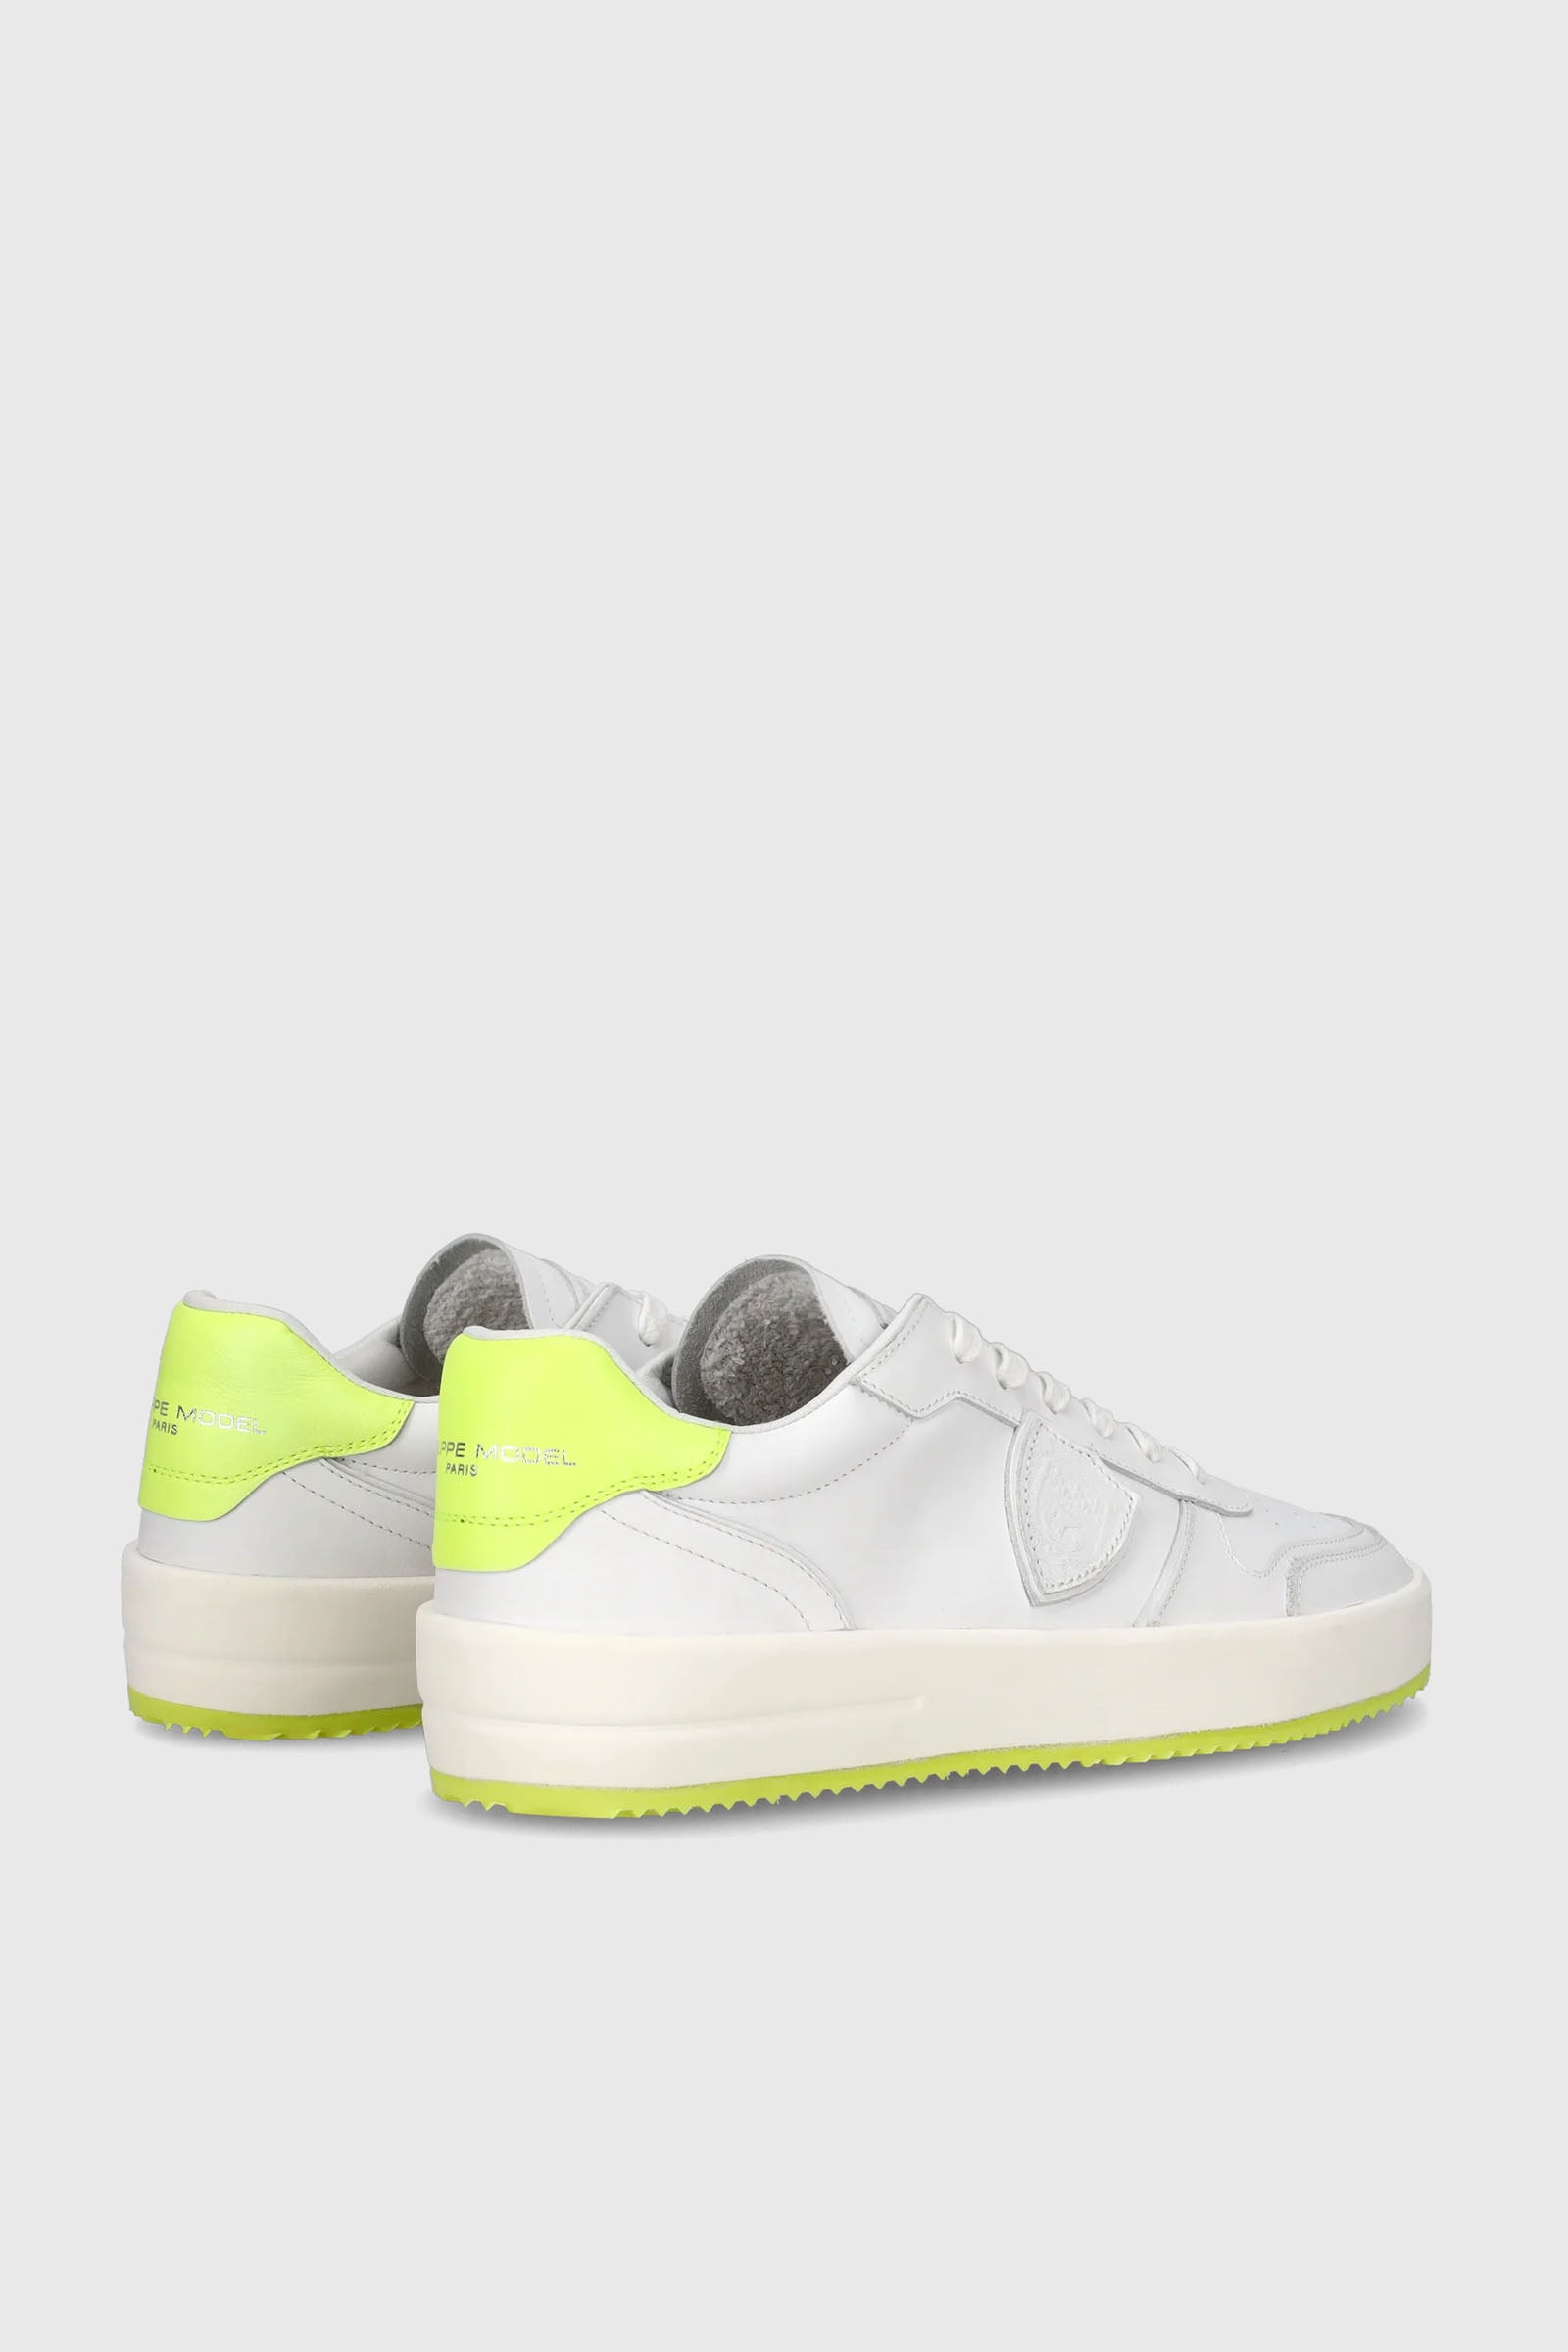 Philippe Model Sneaker Nice Veau Leather White/Yellow Fluo - 3